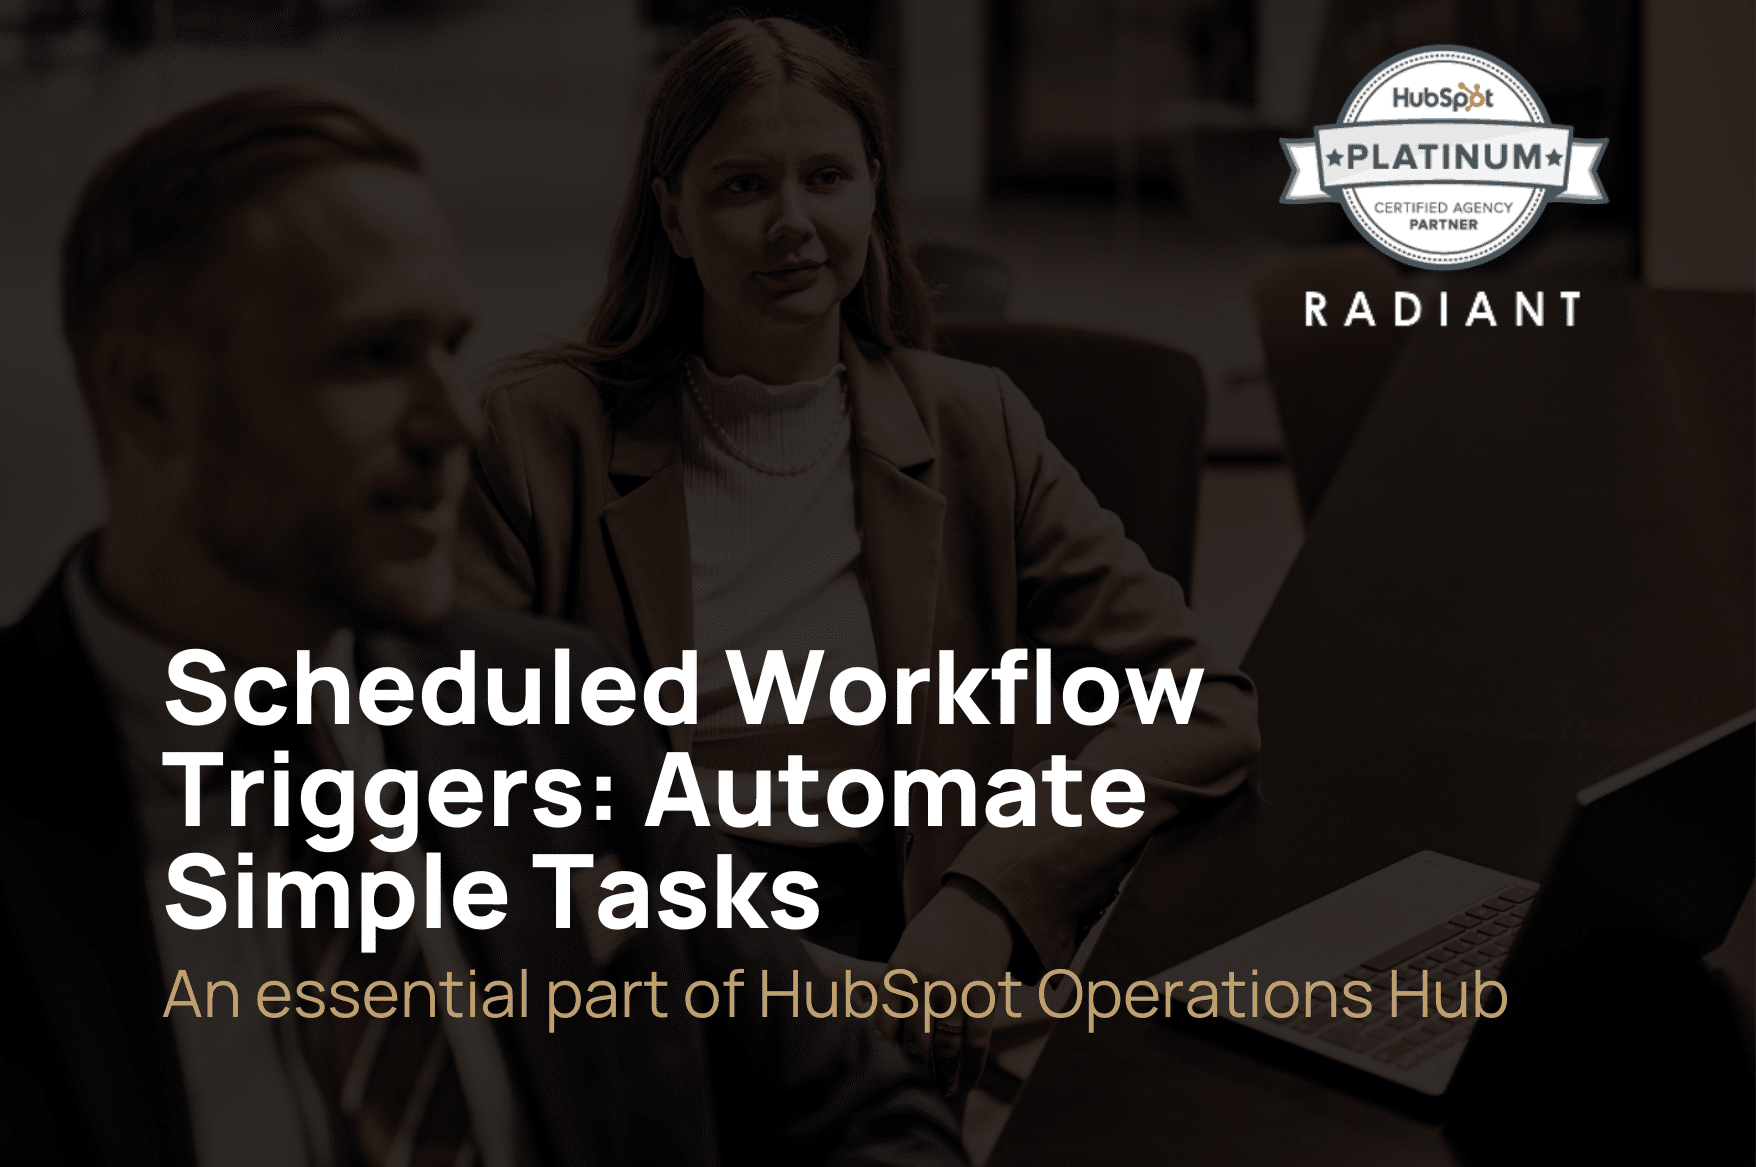 Scheduled Workflow Triggers: Automate Simple Tasks